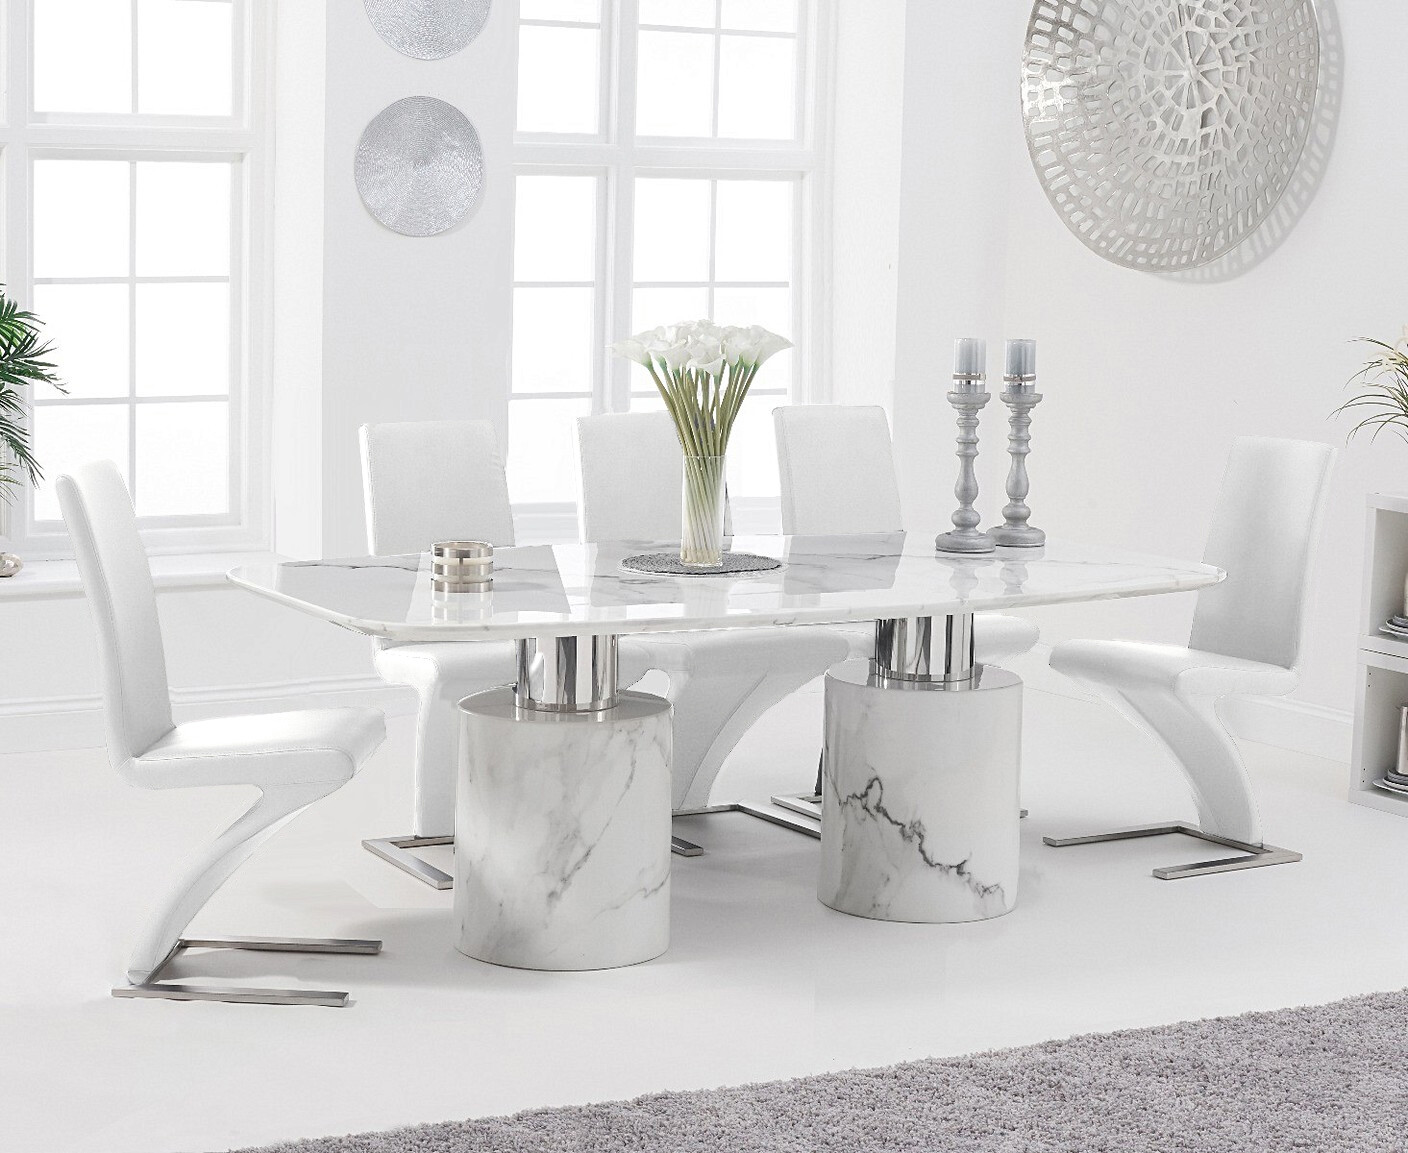 Antonio 180cm White Marble Dining Table With 8 White Aldo Chairs